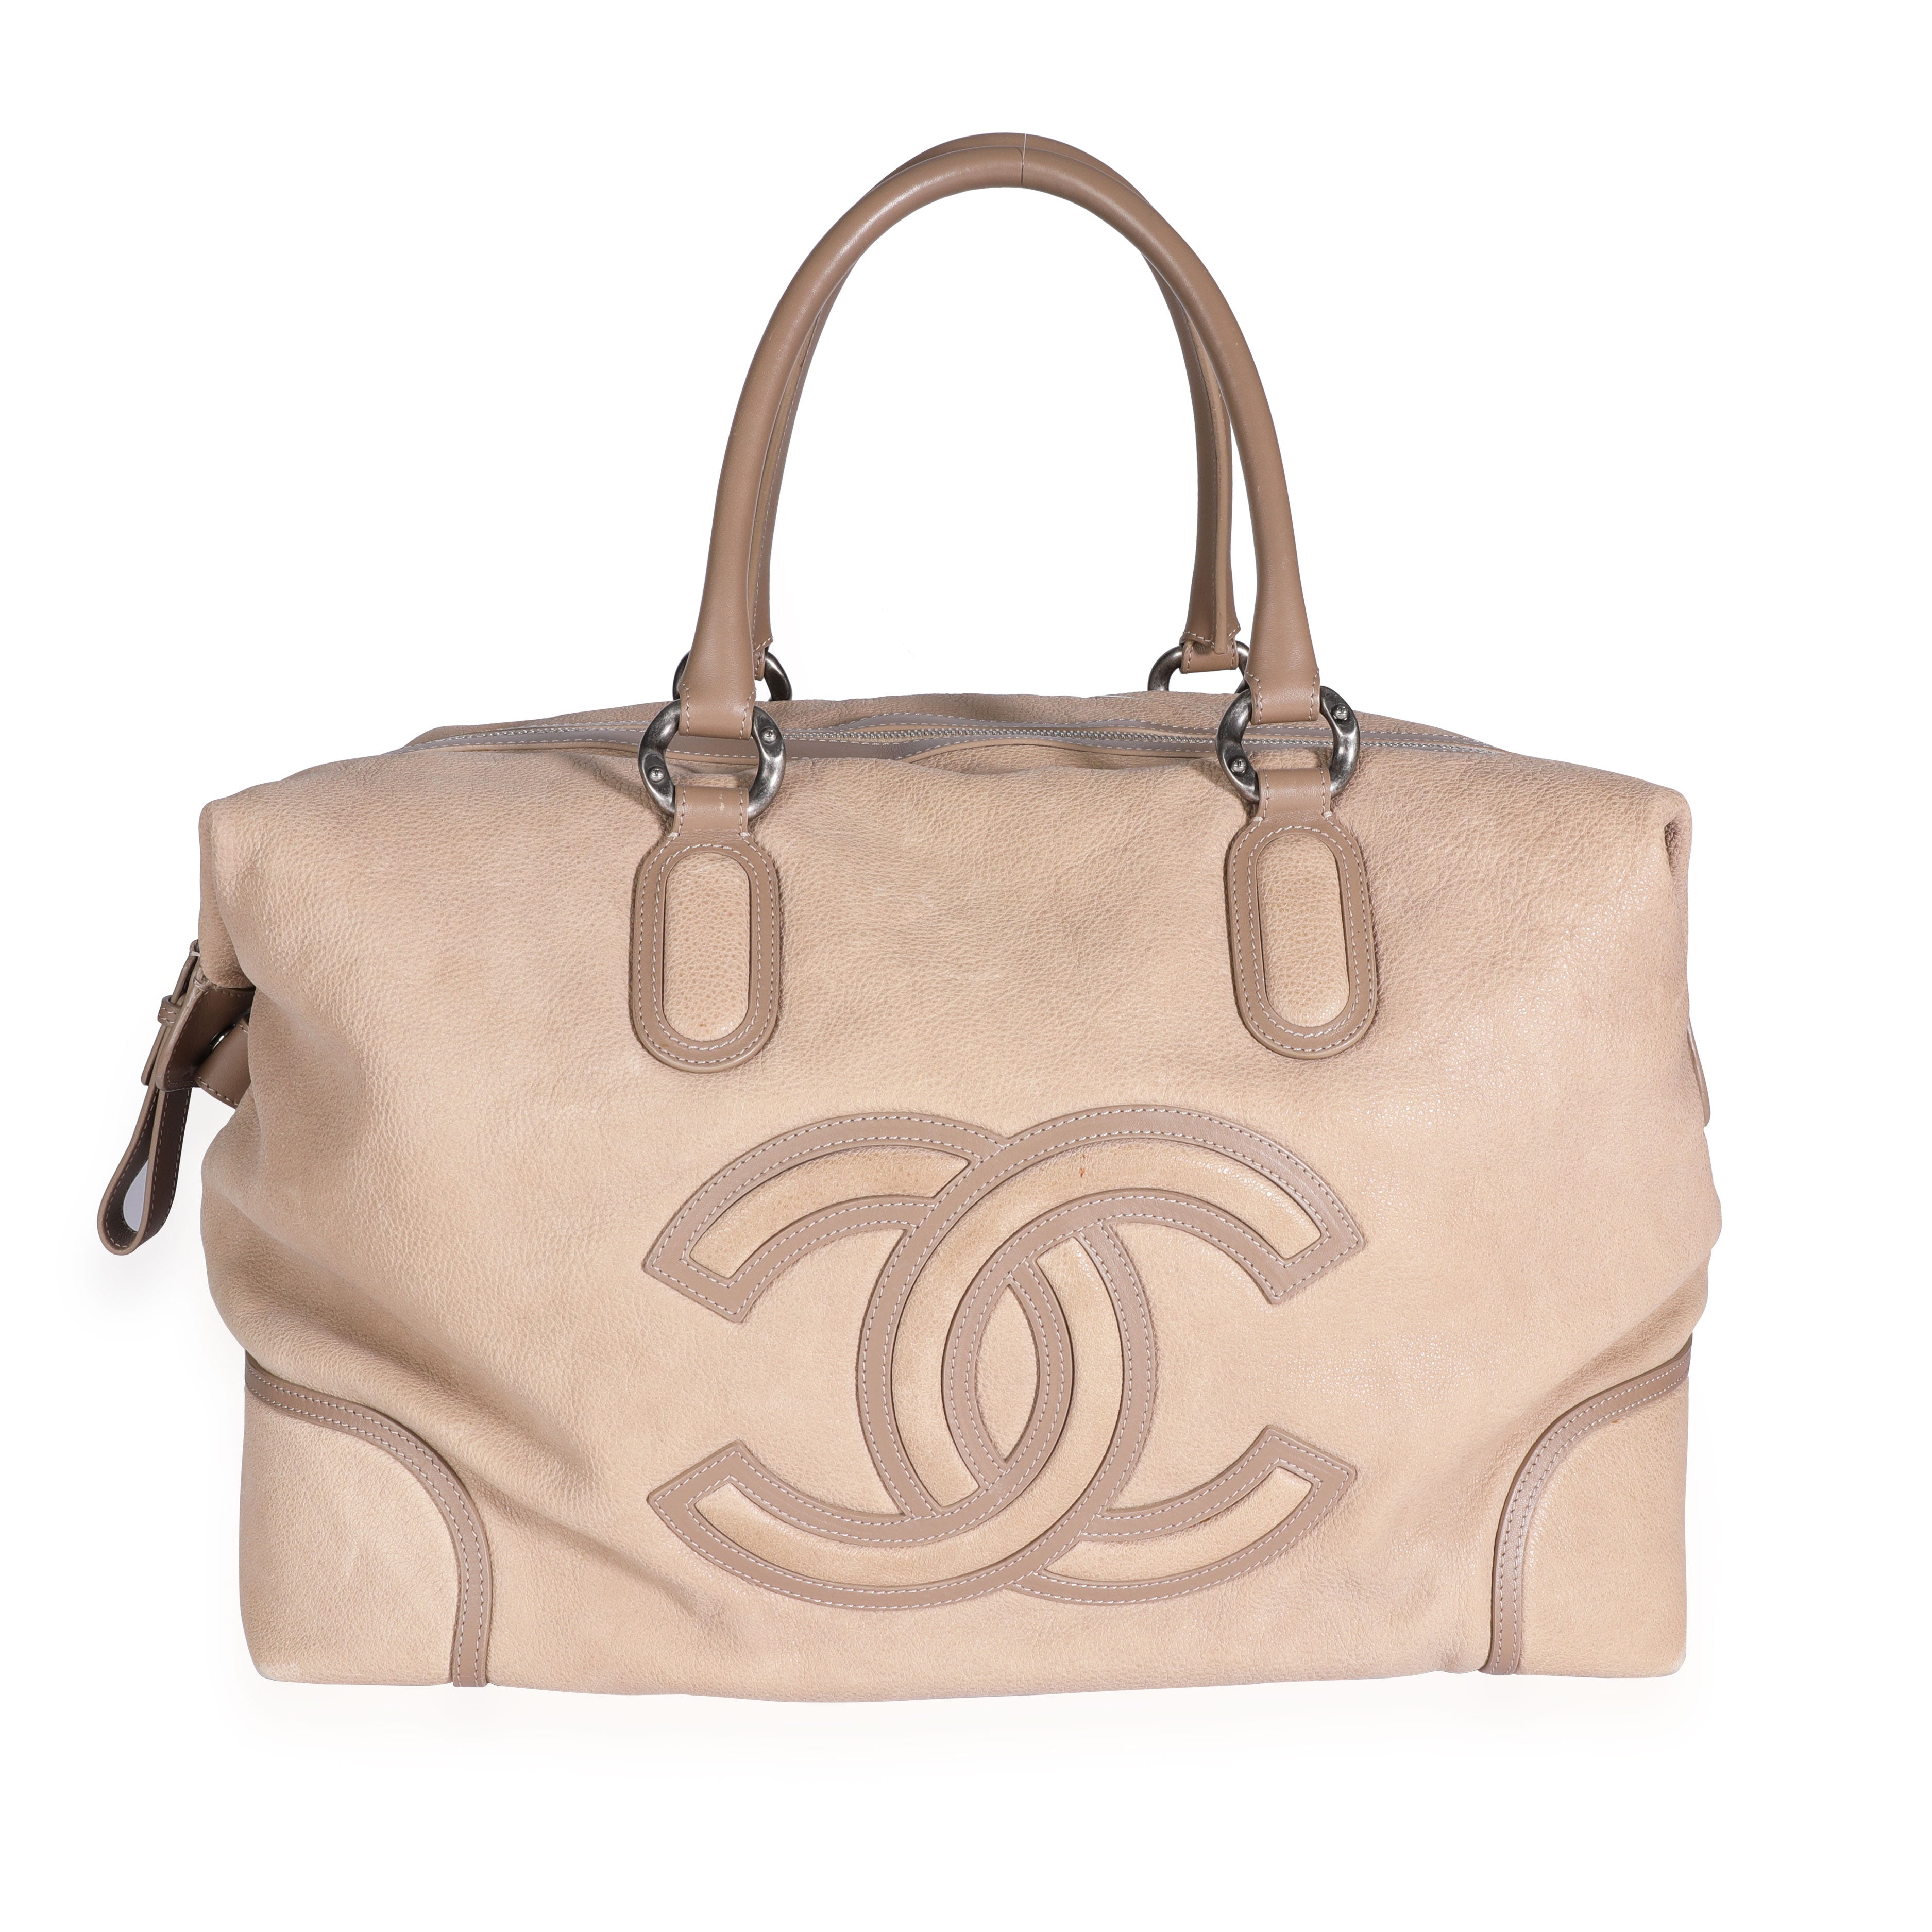 Timeless/classique leather handbag Chanel Beige in Leather - 38942112